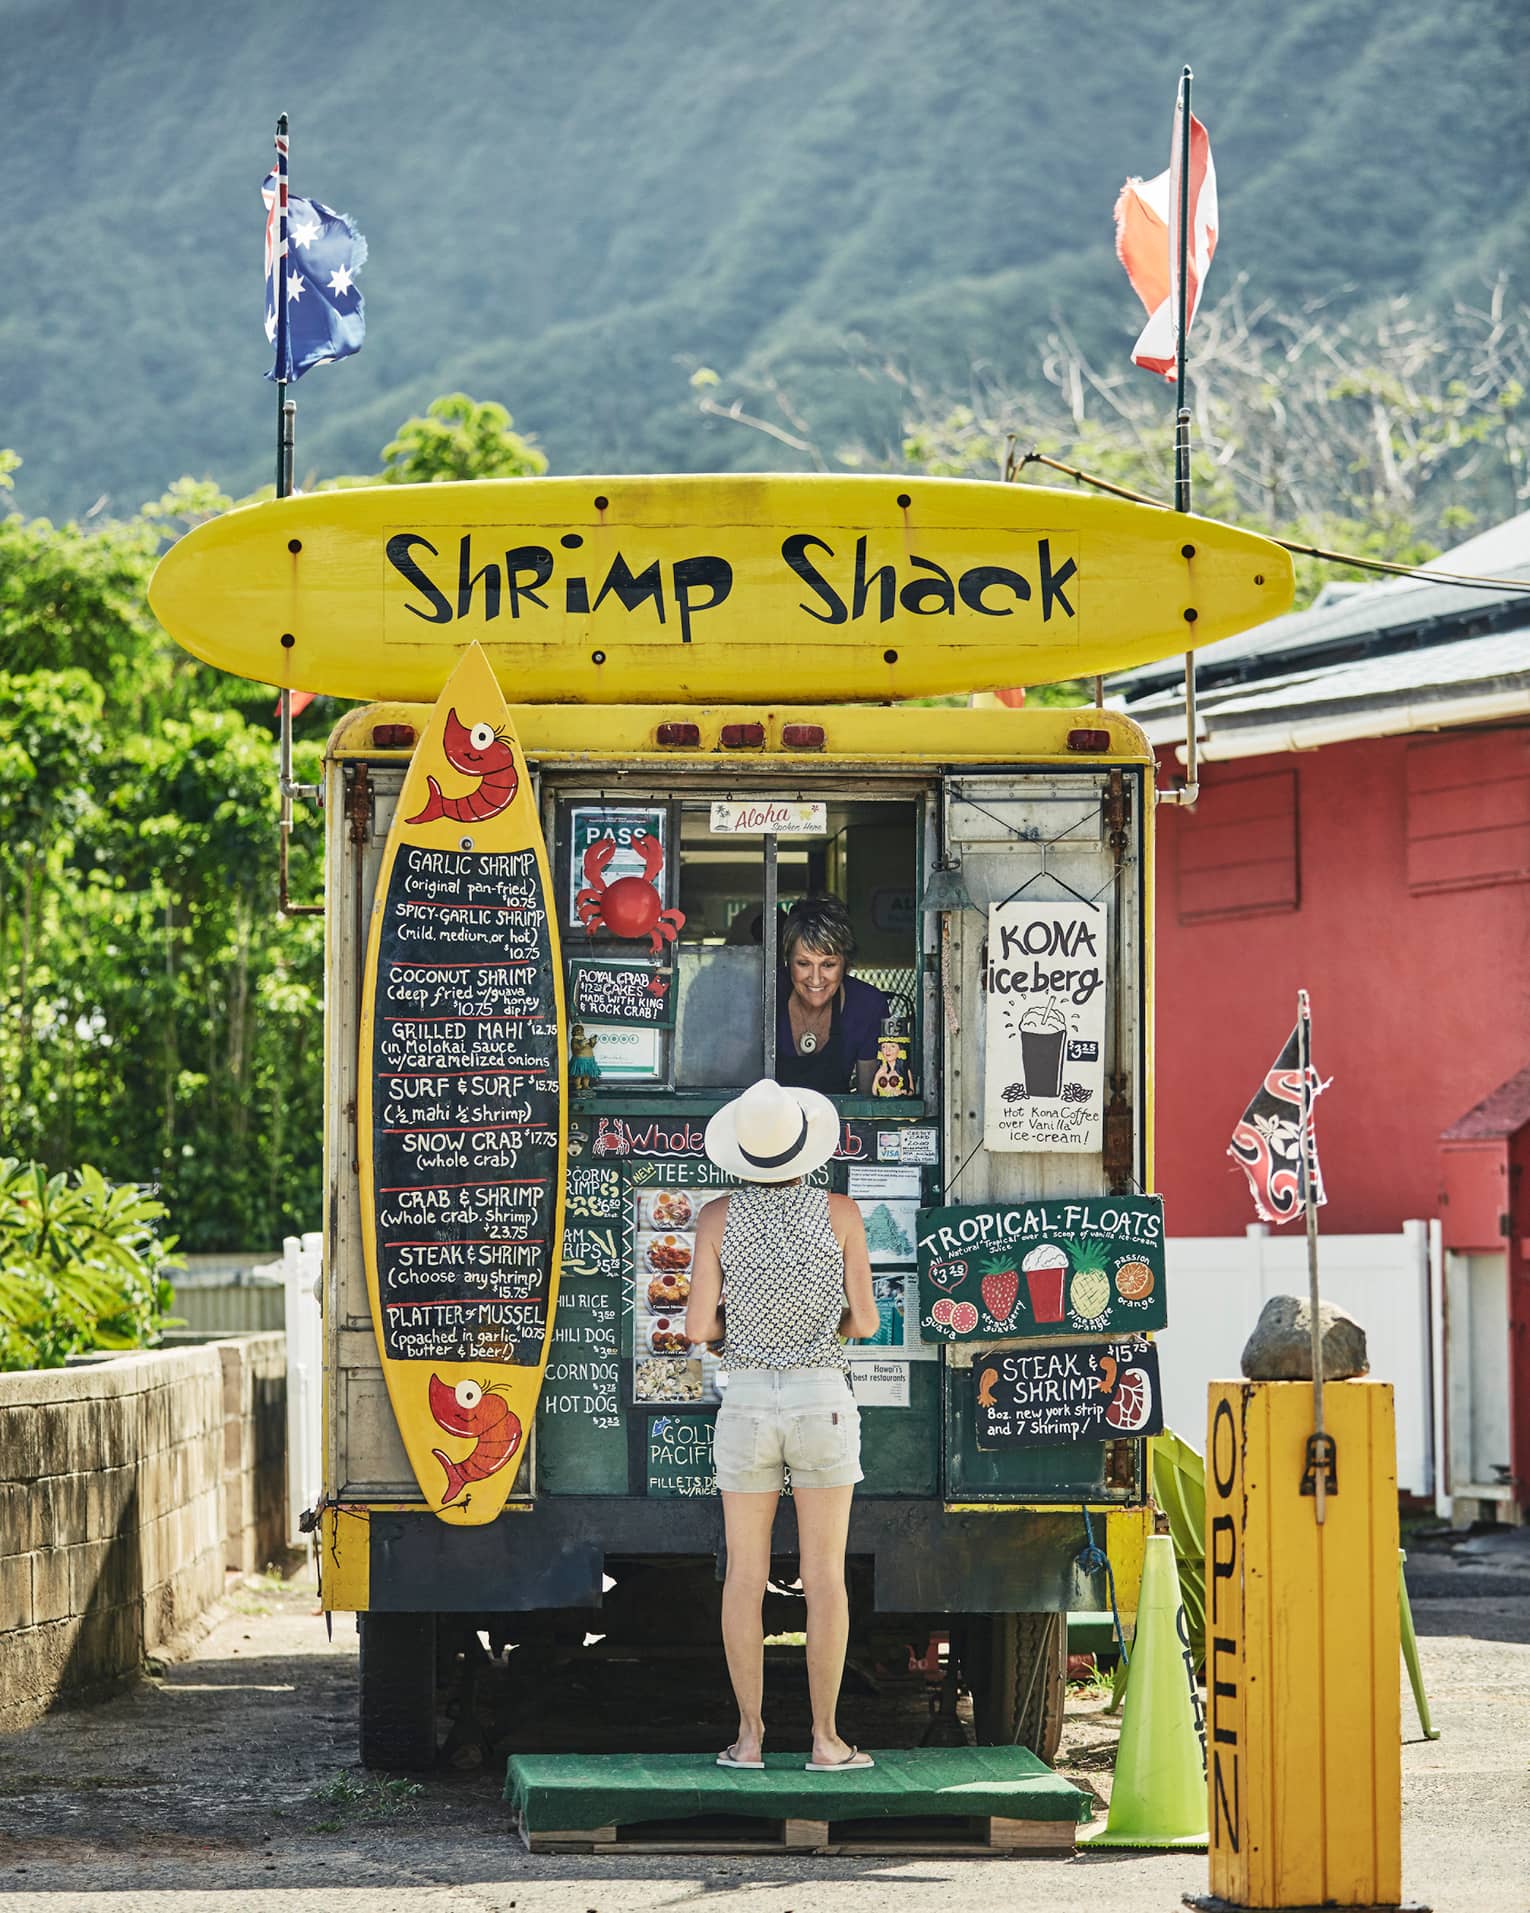 Woman orders from Shrimp Shack food stand with colourful yellow signs 